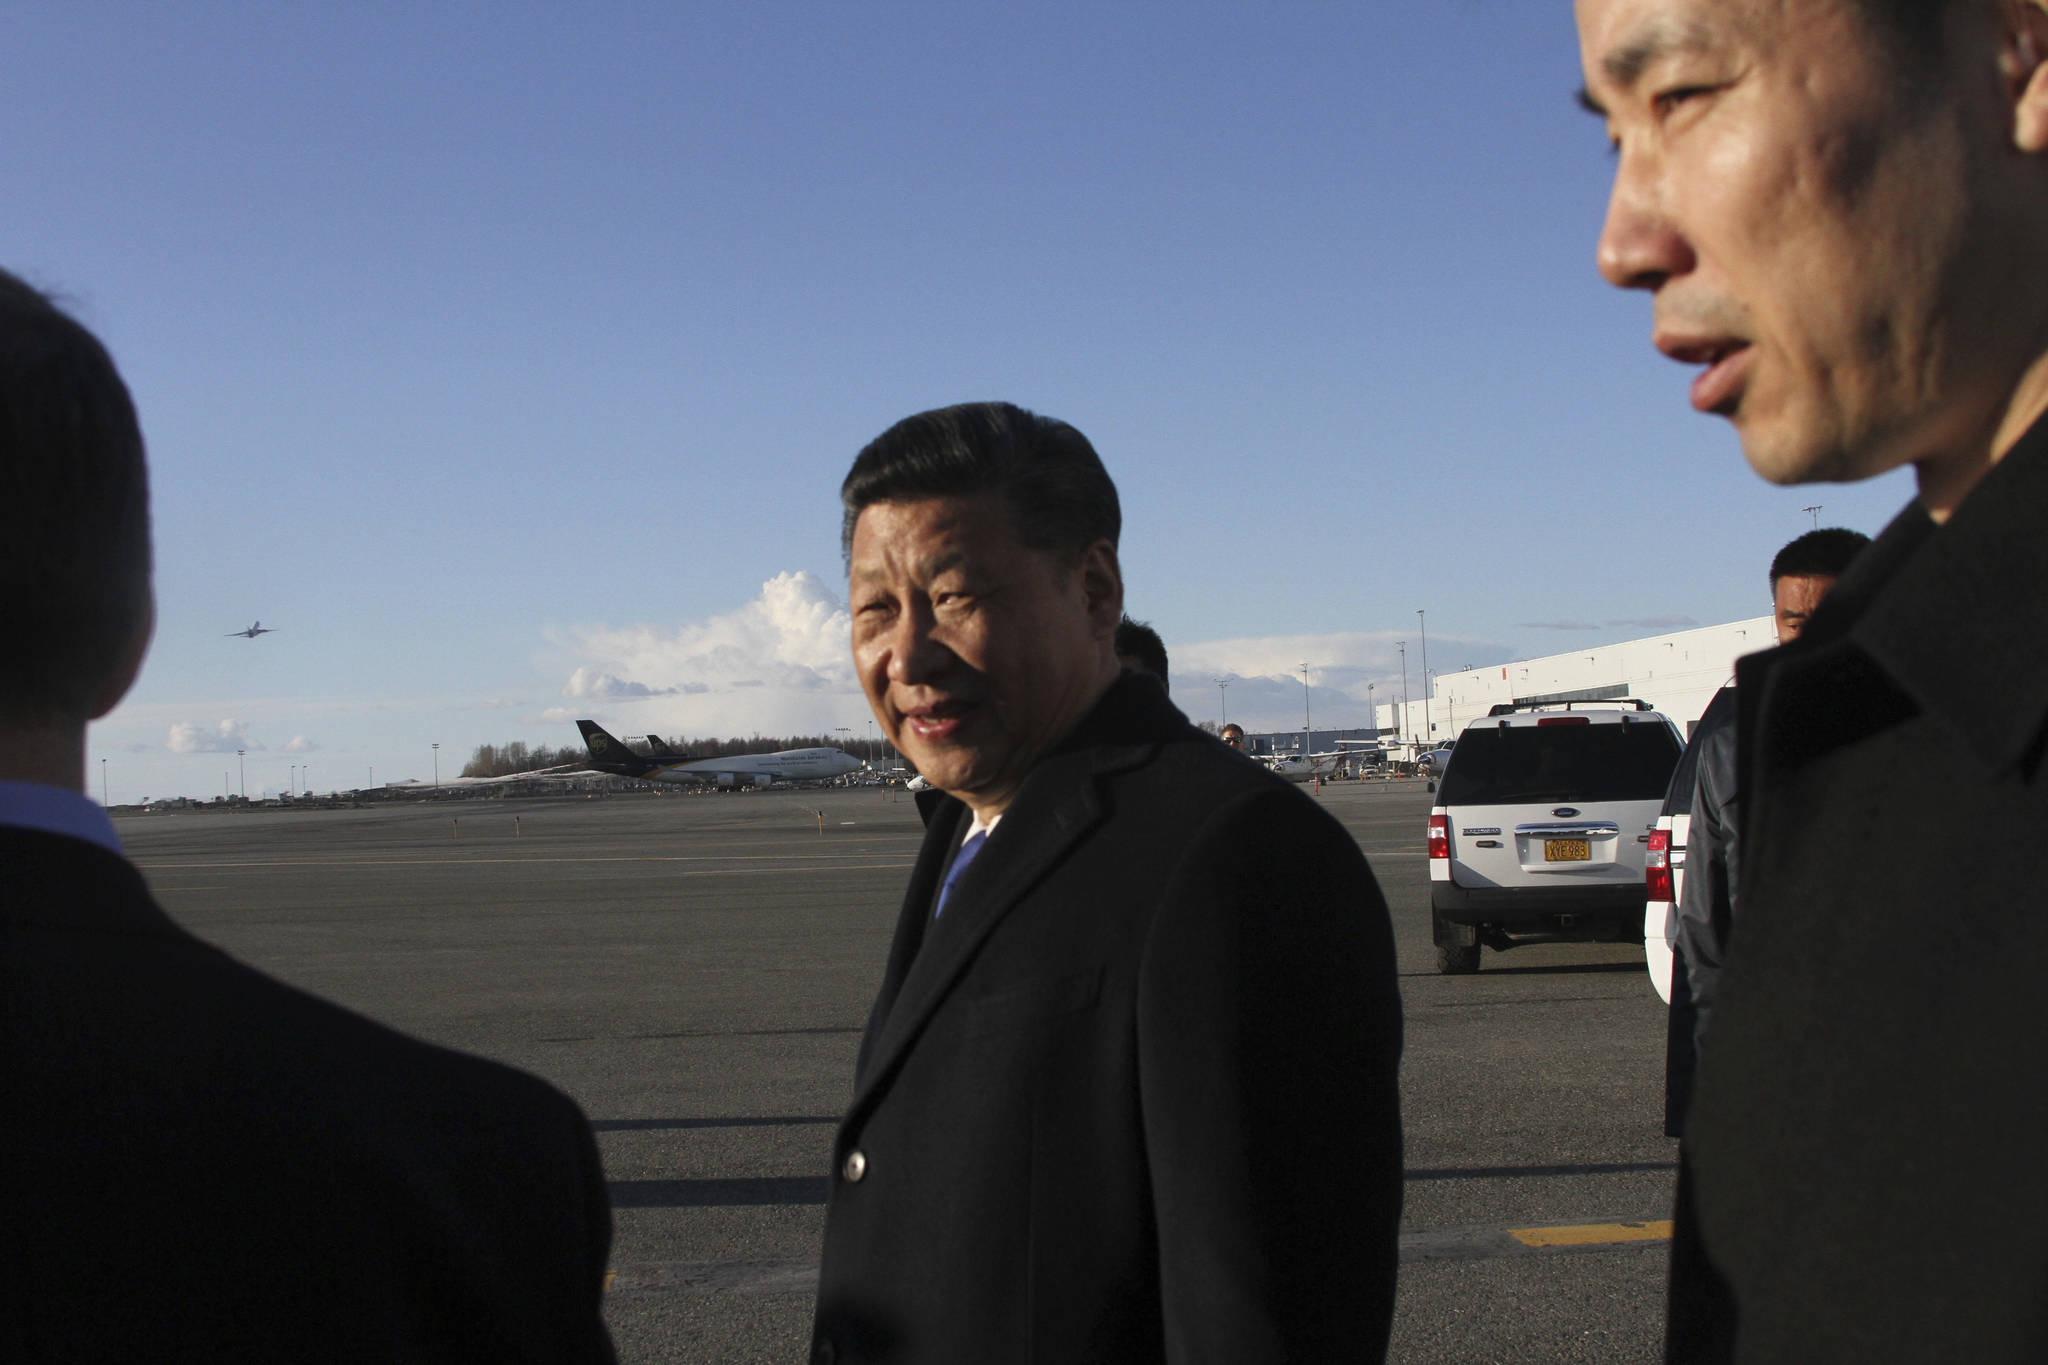 Chinese President Xi Jinping, center, smiles after getting off his plane for a refueling stop in Anchorage, Alaska, on Friday, April 7, 2017. Xi planned a little sightseeing and a meeting and dinner with Alaska Gov. Bill Walker after meeting earlier in the day with President Donald Trump in Florida. (AP Photo/Mark Thiessen)